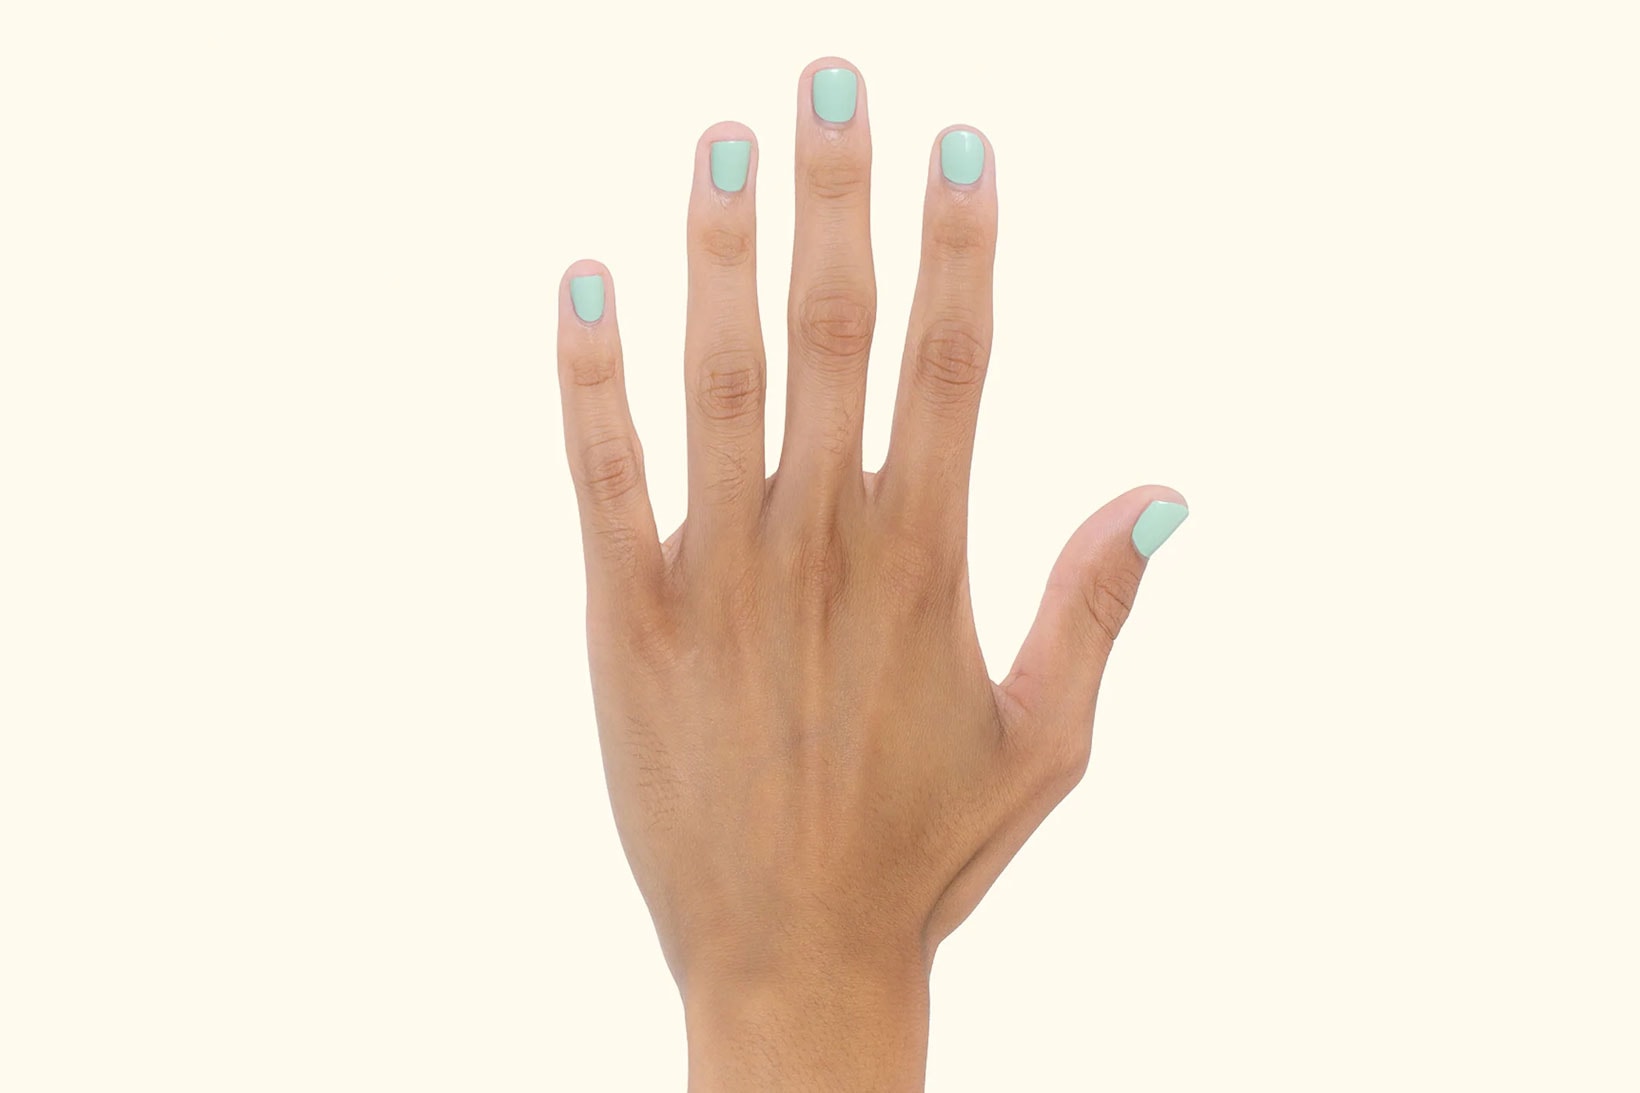 Tyler The Creator GOLF le FLEUR Nail Polish File New Colors Jade Blonde Rose Release Where to buy